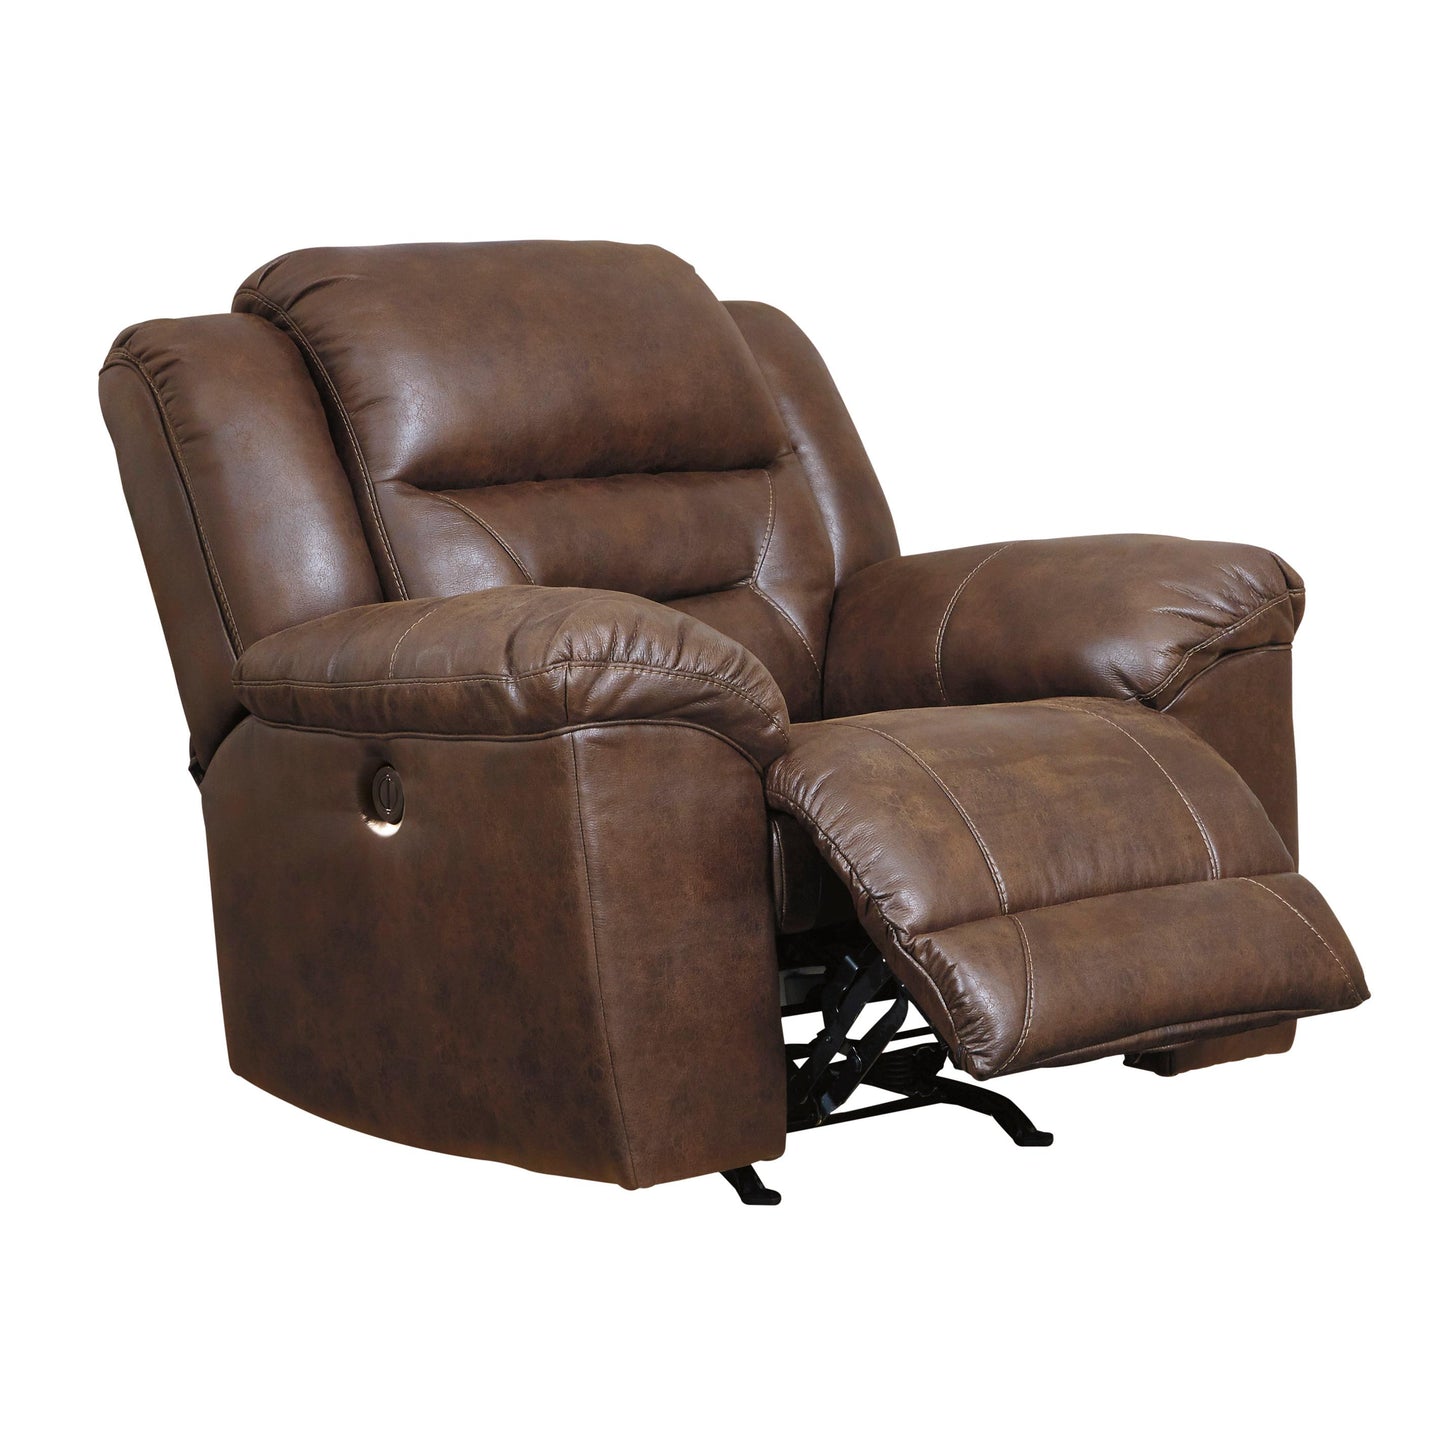 Signature Design by Ashley Stoneland Power Rocker Leather Look Recliner 3990498 IMAGE 3